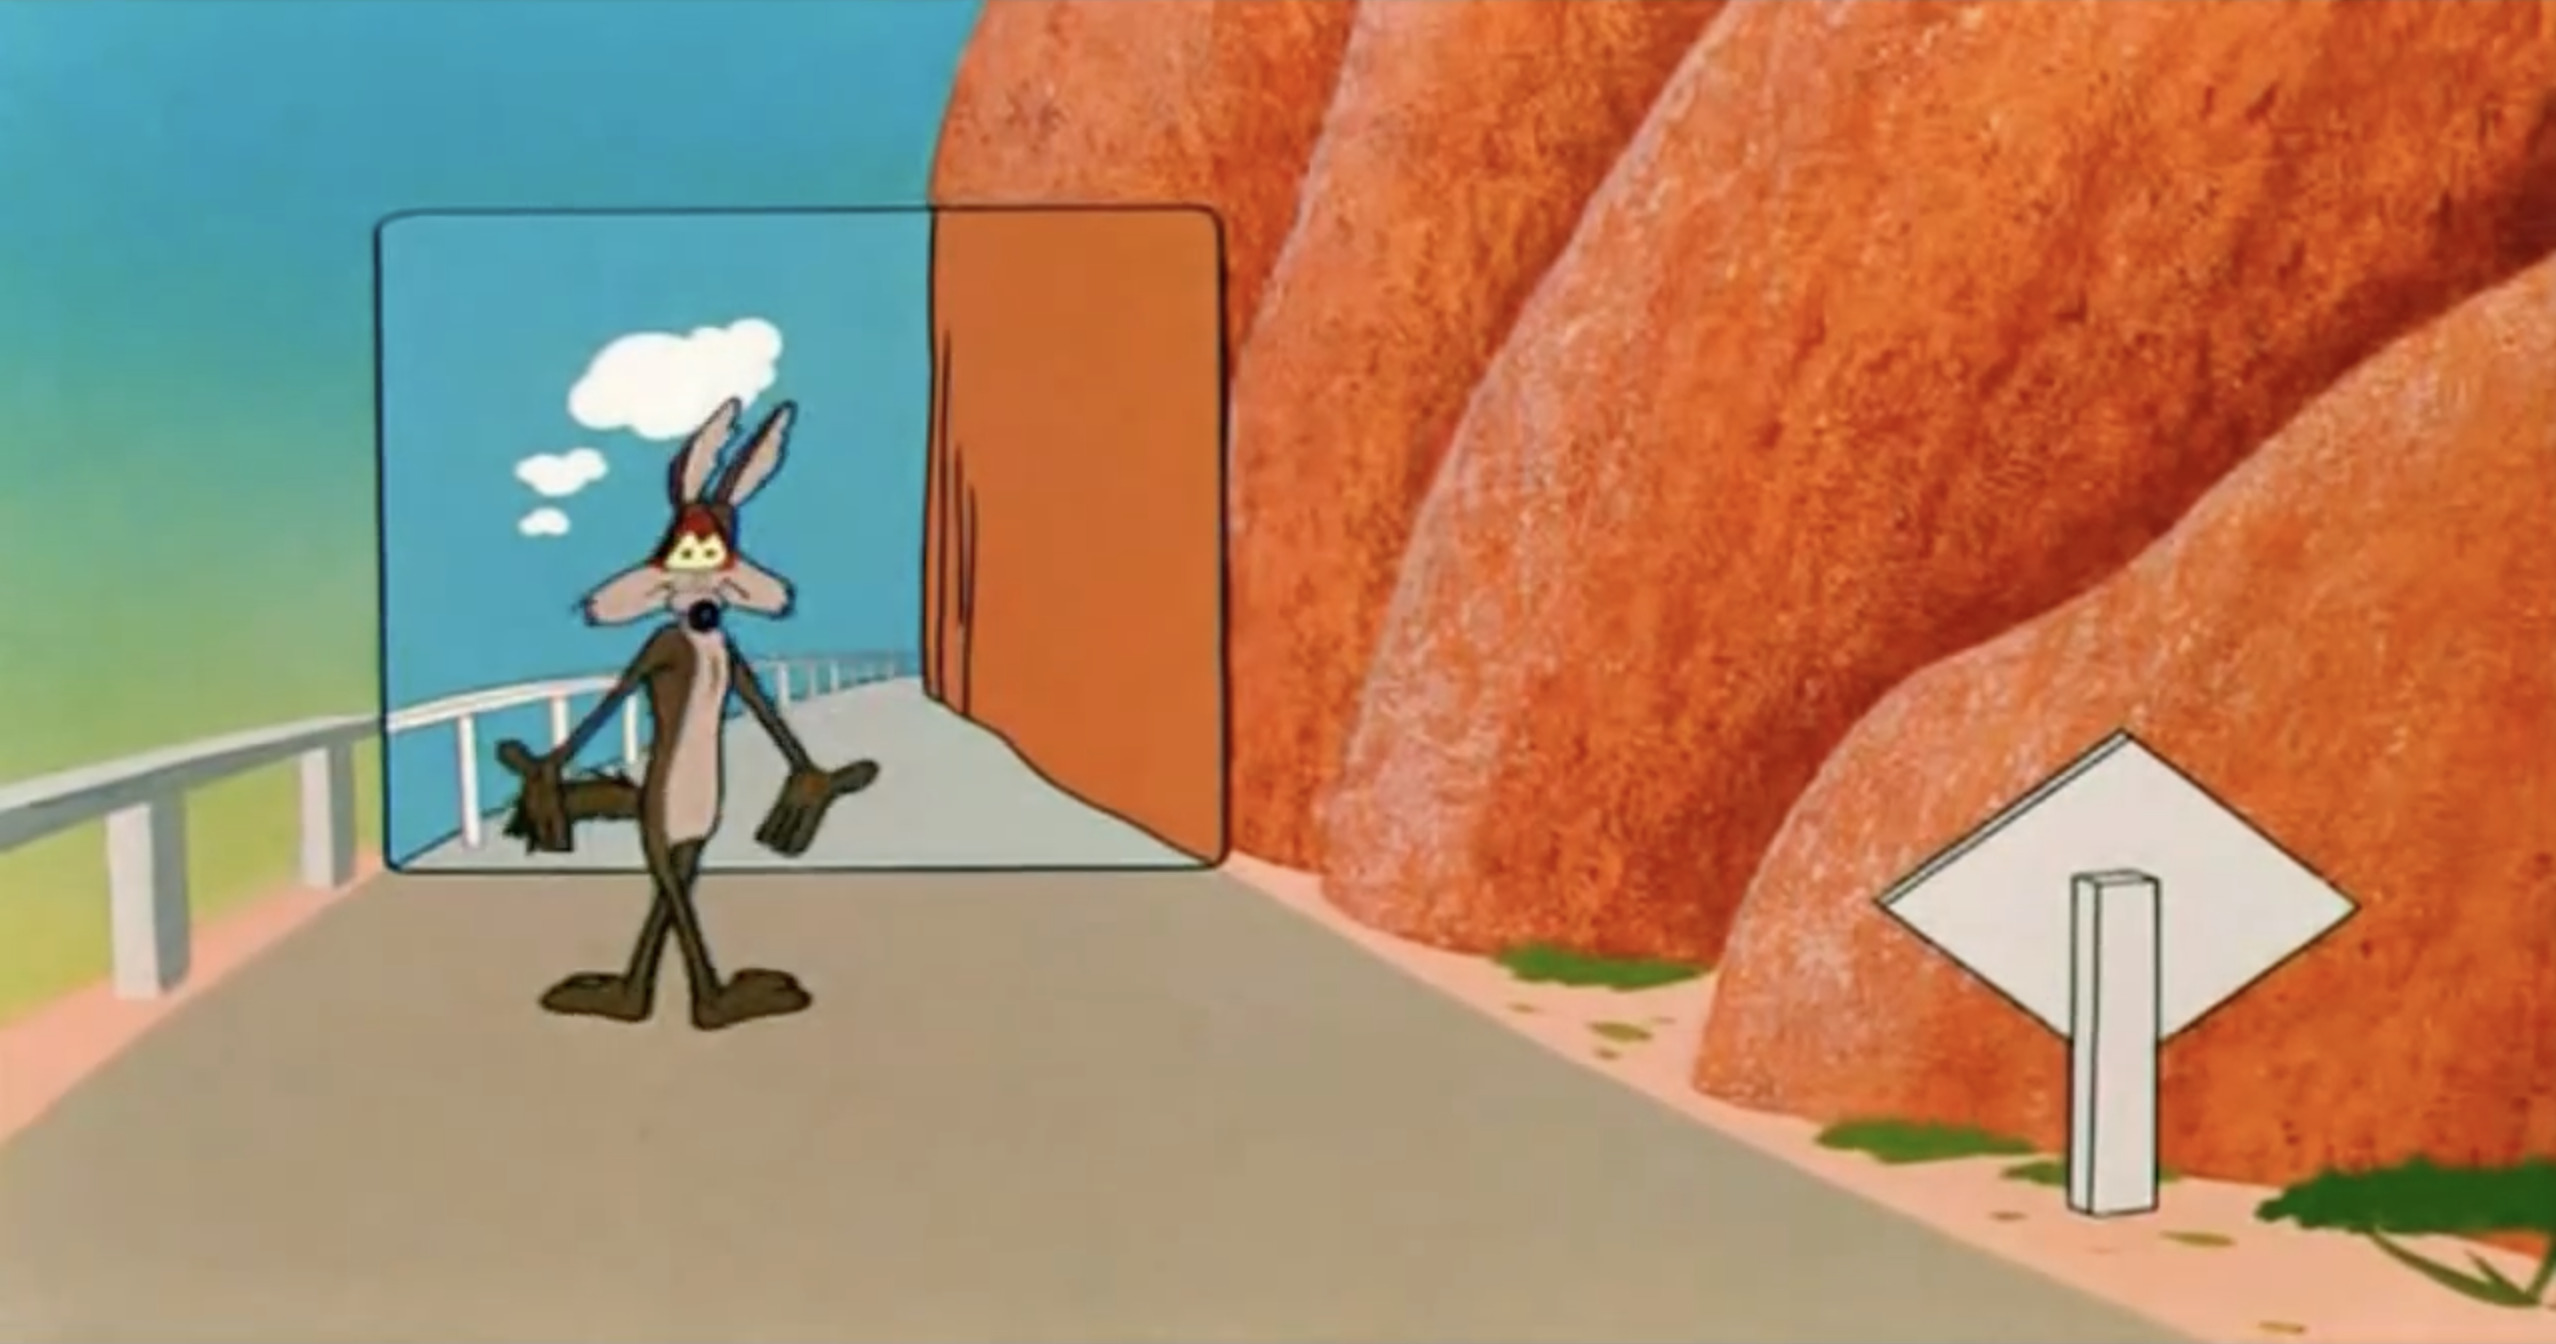 Wile E. Coyote in front of a picture